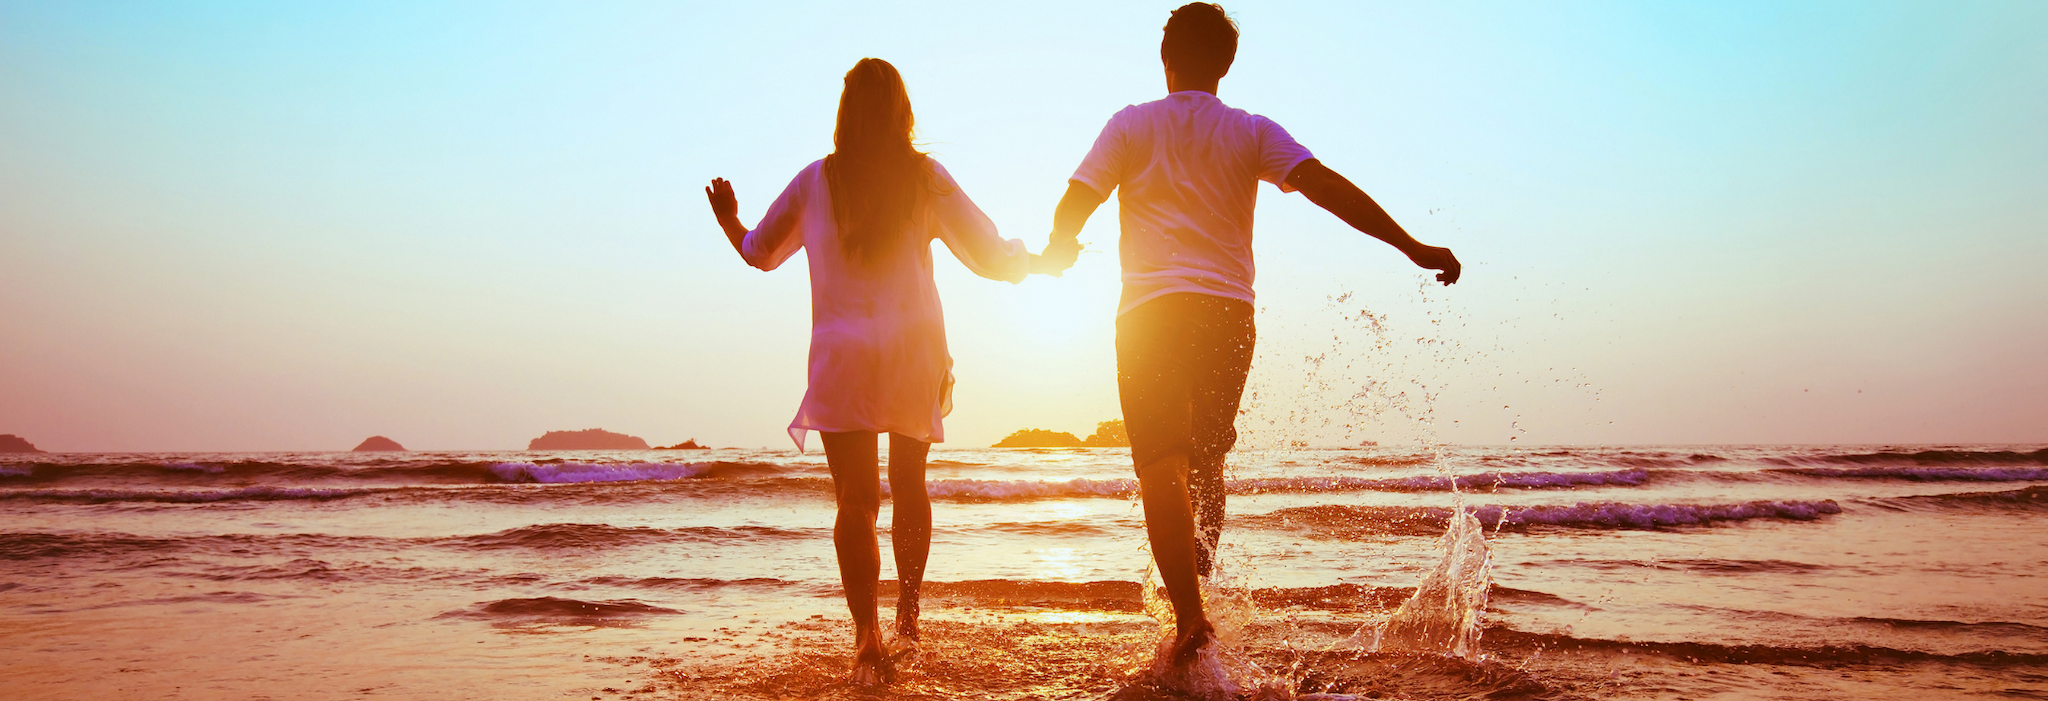 Married couples can enjoy a second honeymoon, singles can go solo or travel with friends/ family